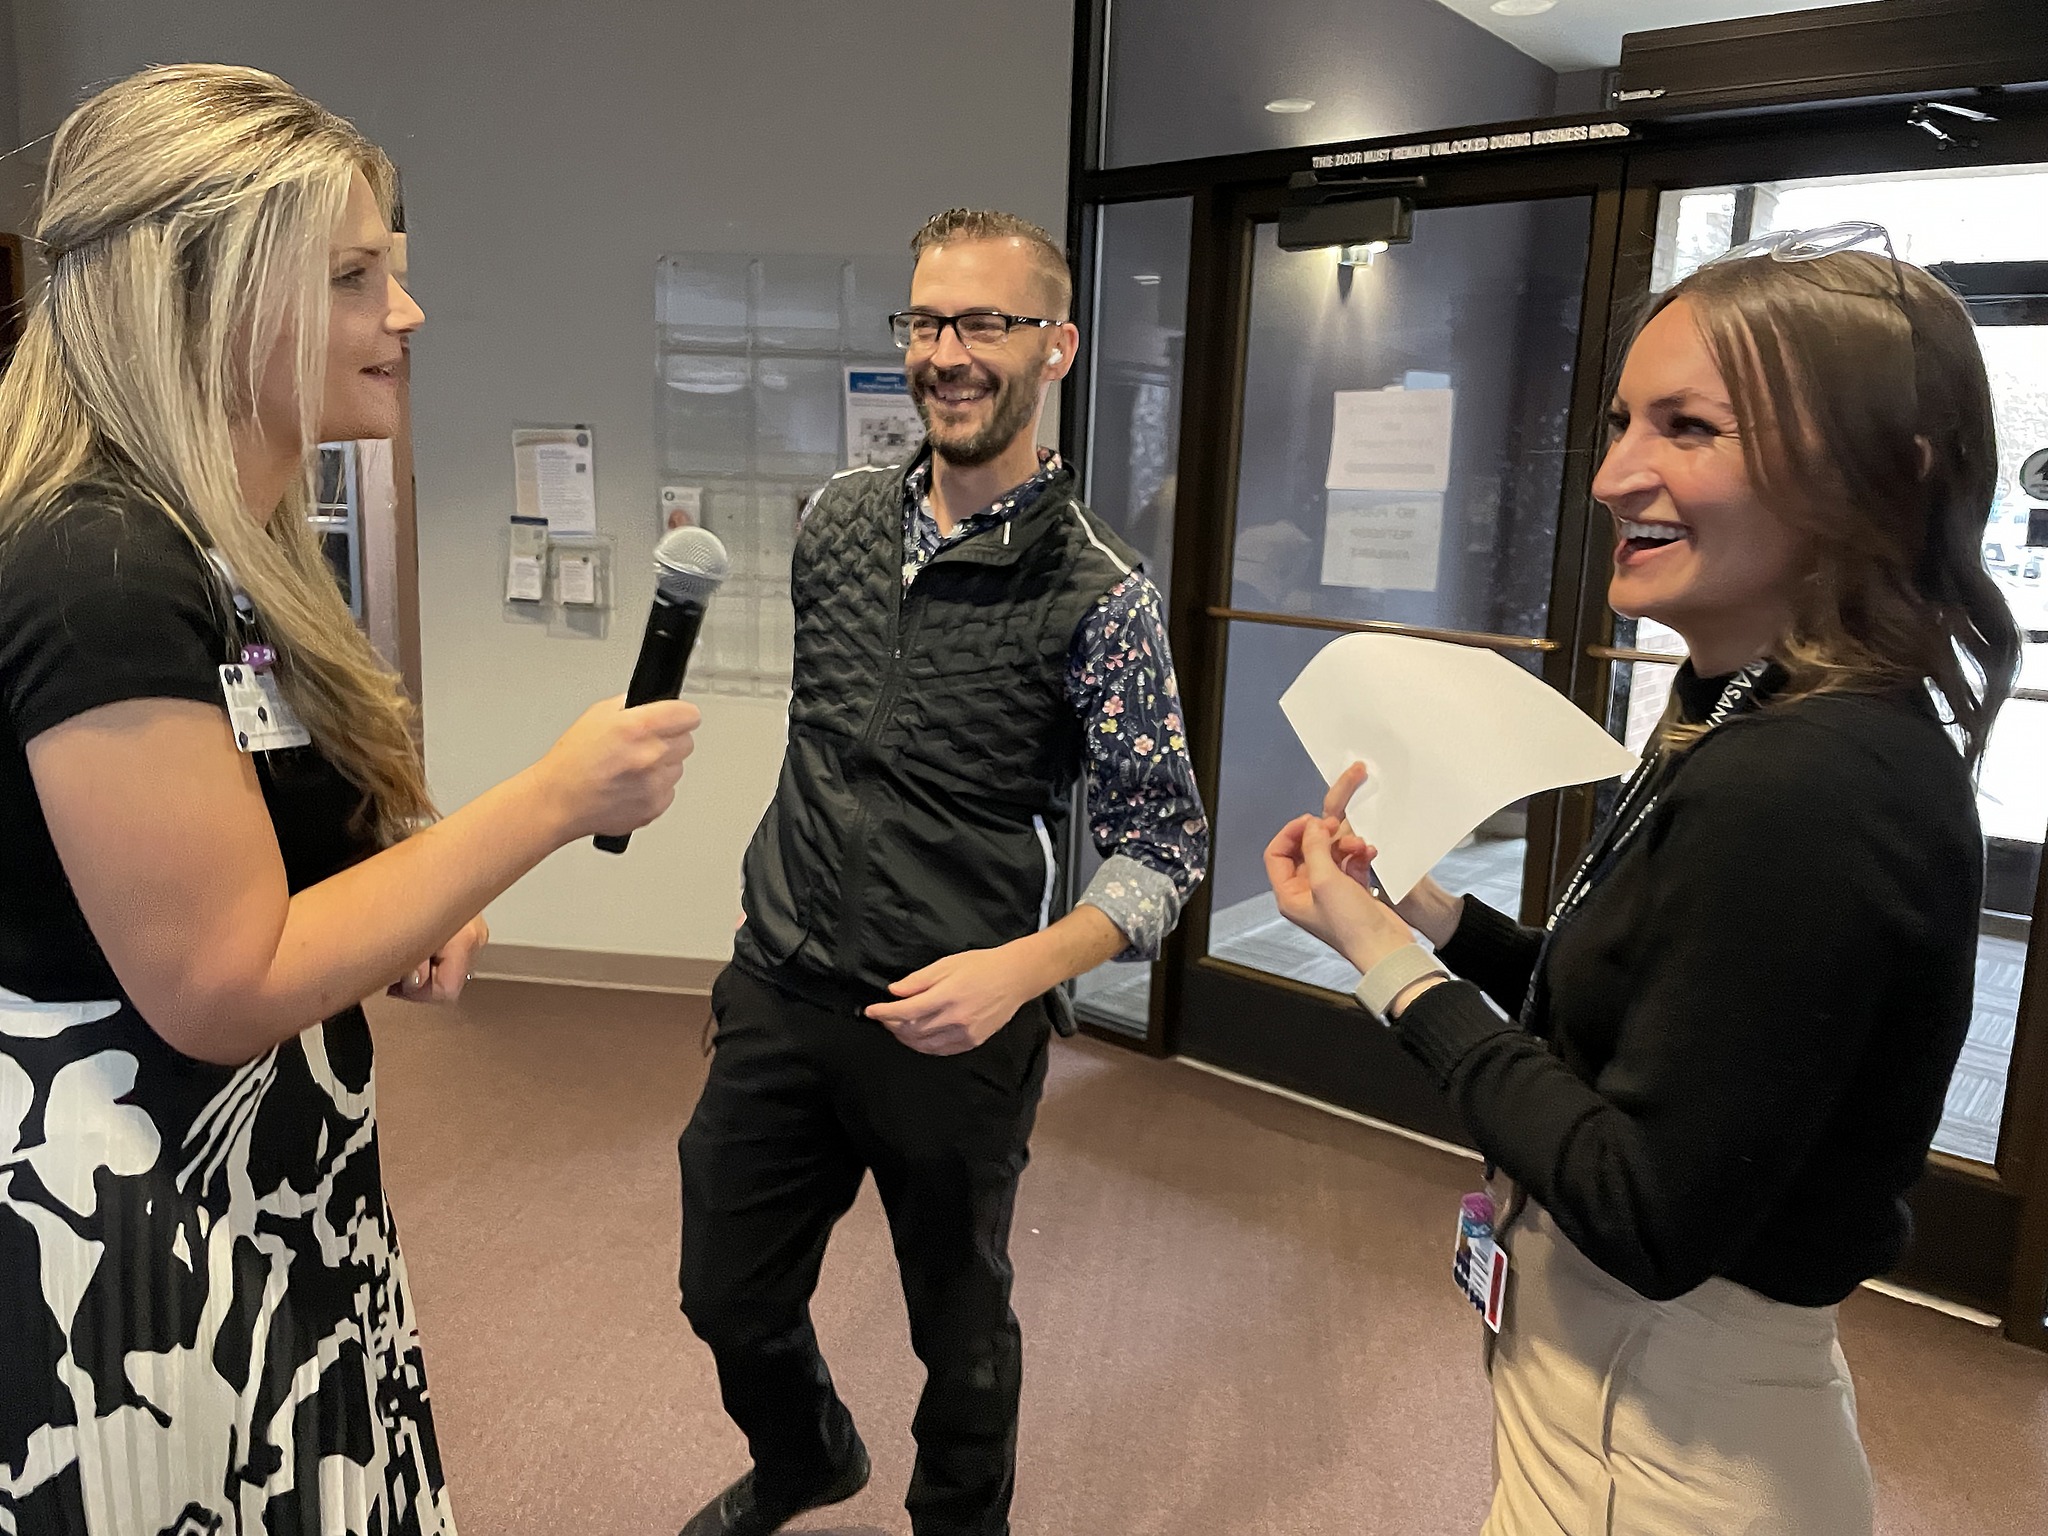 Talent Acquisition’s Tami Garcia (left), Kelly Williams and Bailey Morgan share a laugh before the event starts. More than 30 new grad nurses are in the process of being hired at Asante in the wake of that in-person event.